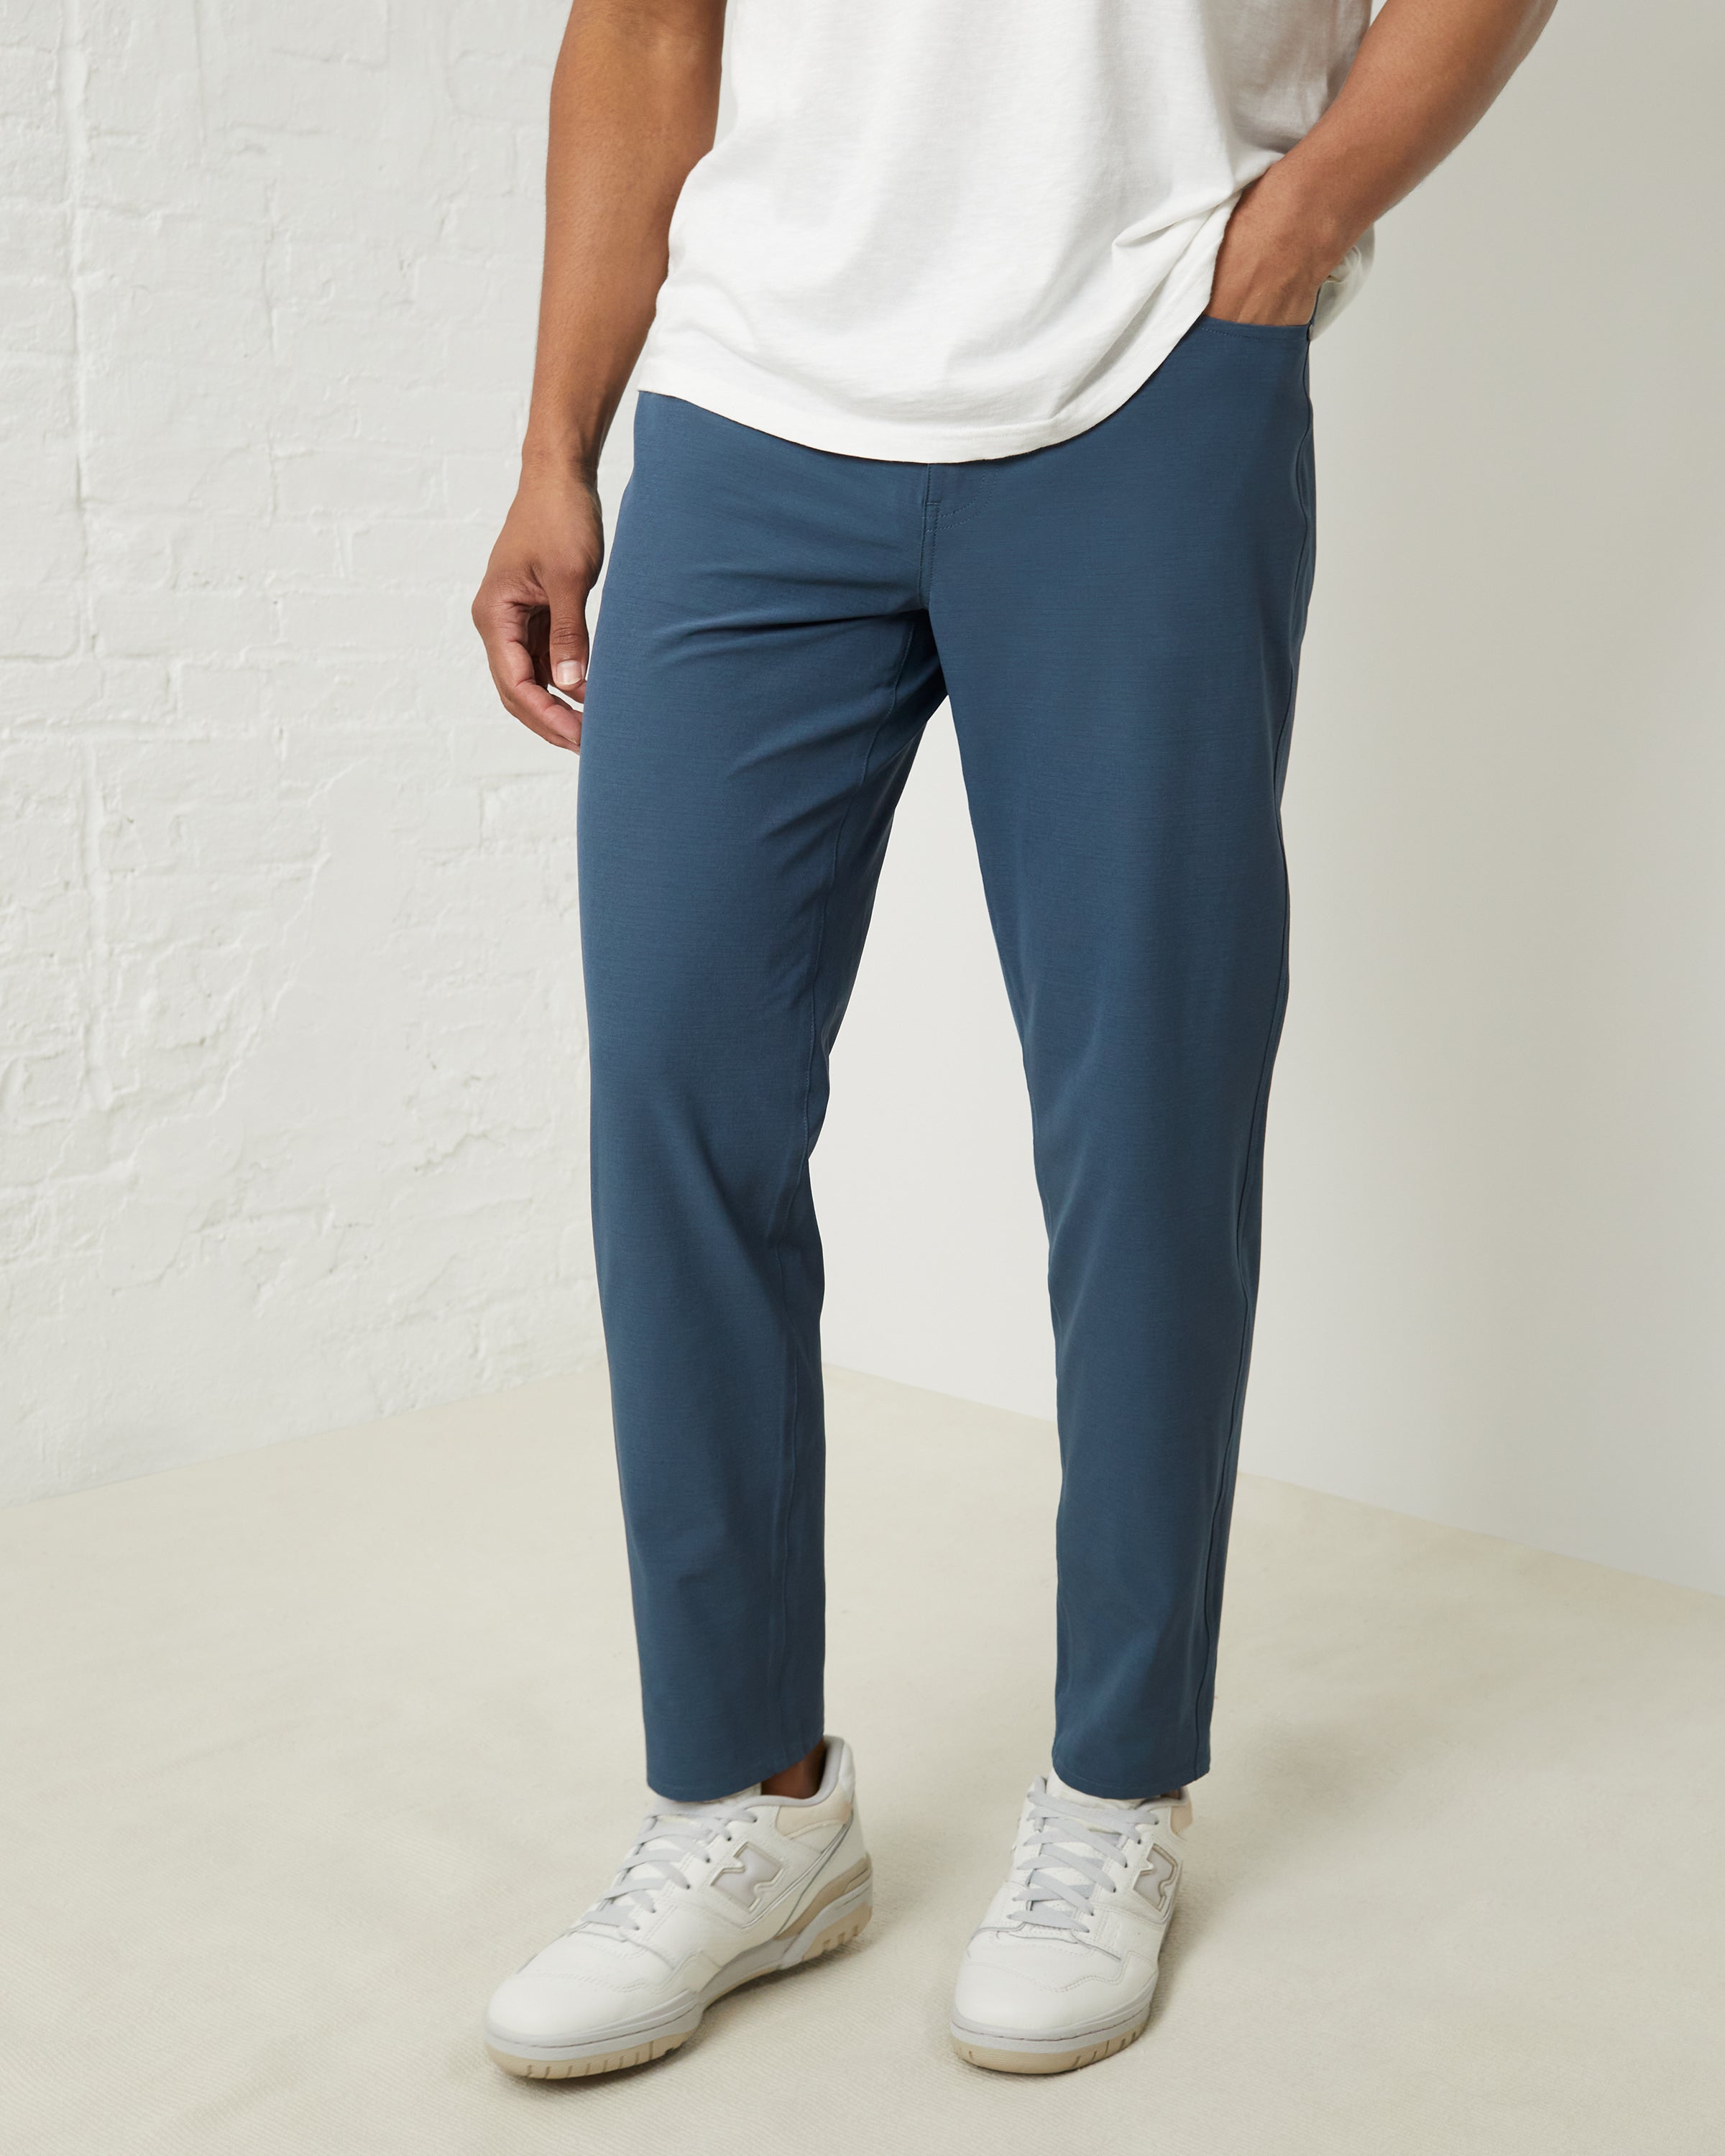 Men's Relaxed Fit Athletic Slim Cord Pant at UpWest